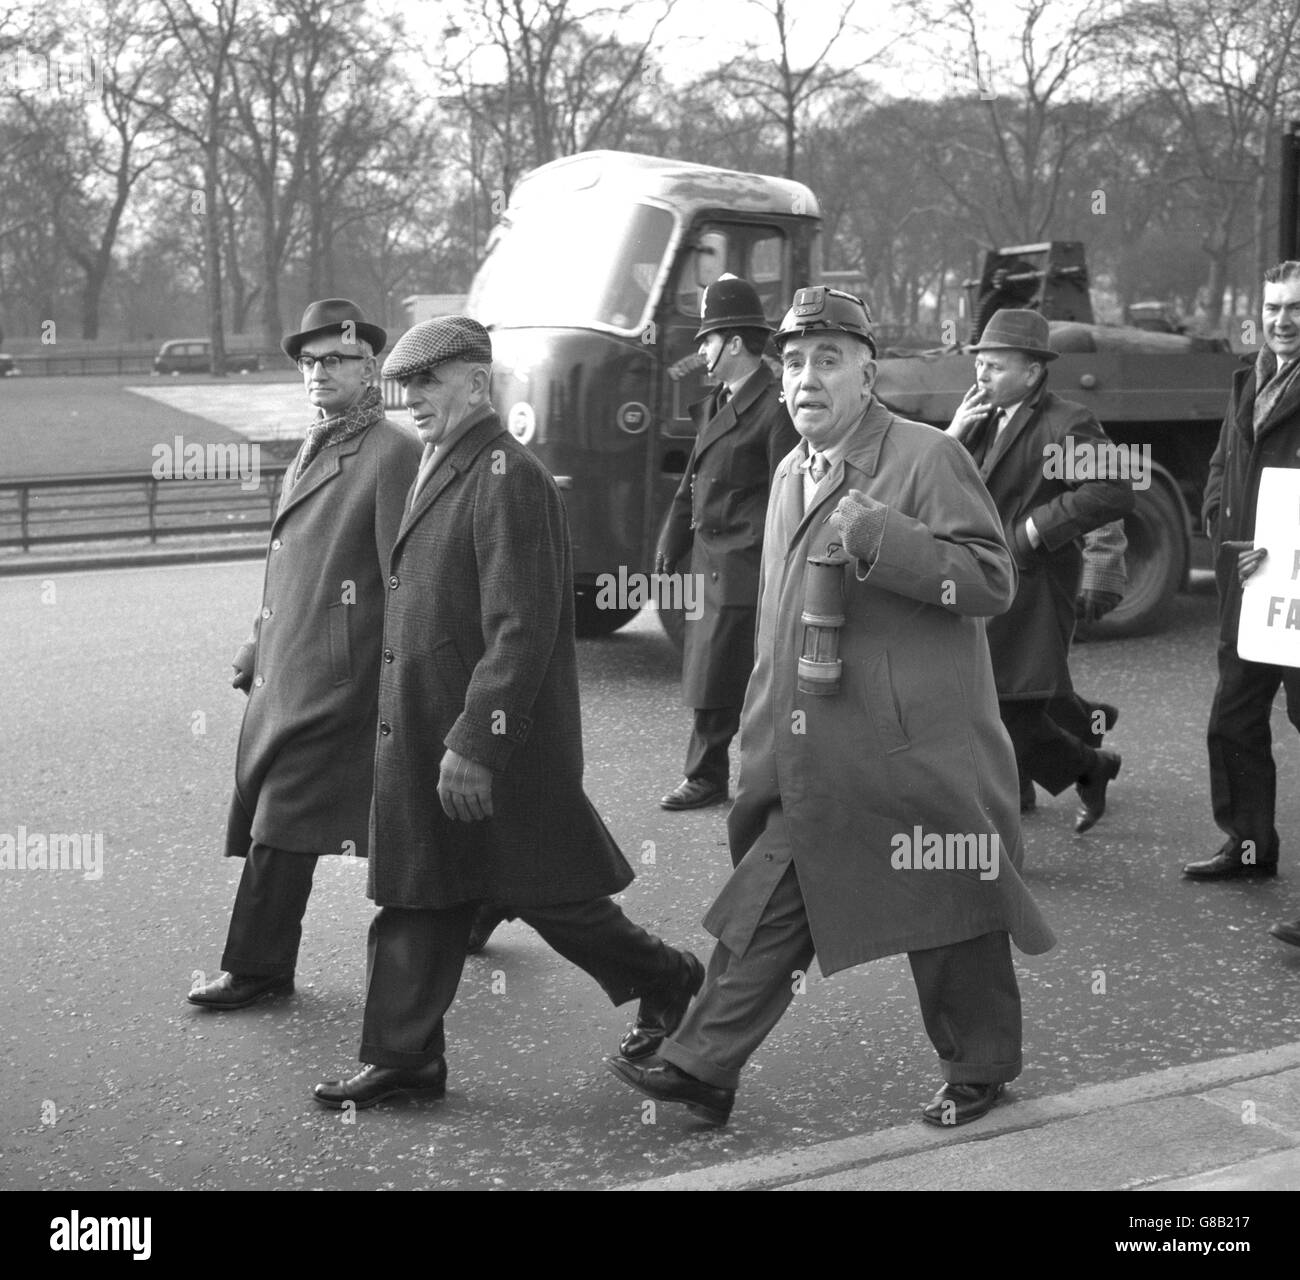 A miner's lamp and helmet are worn in a protest march through London, when miners from all over Britain proceeded from Hyde Park Corner to St James's. After the members dispersed, individuals made their way to the House of Commons to lobby MPs on proposed pit closures. Stock Photo